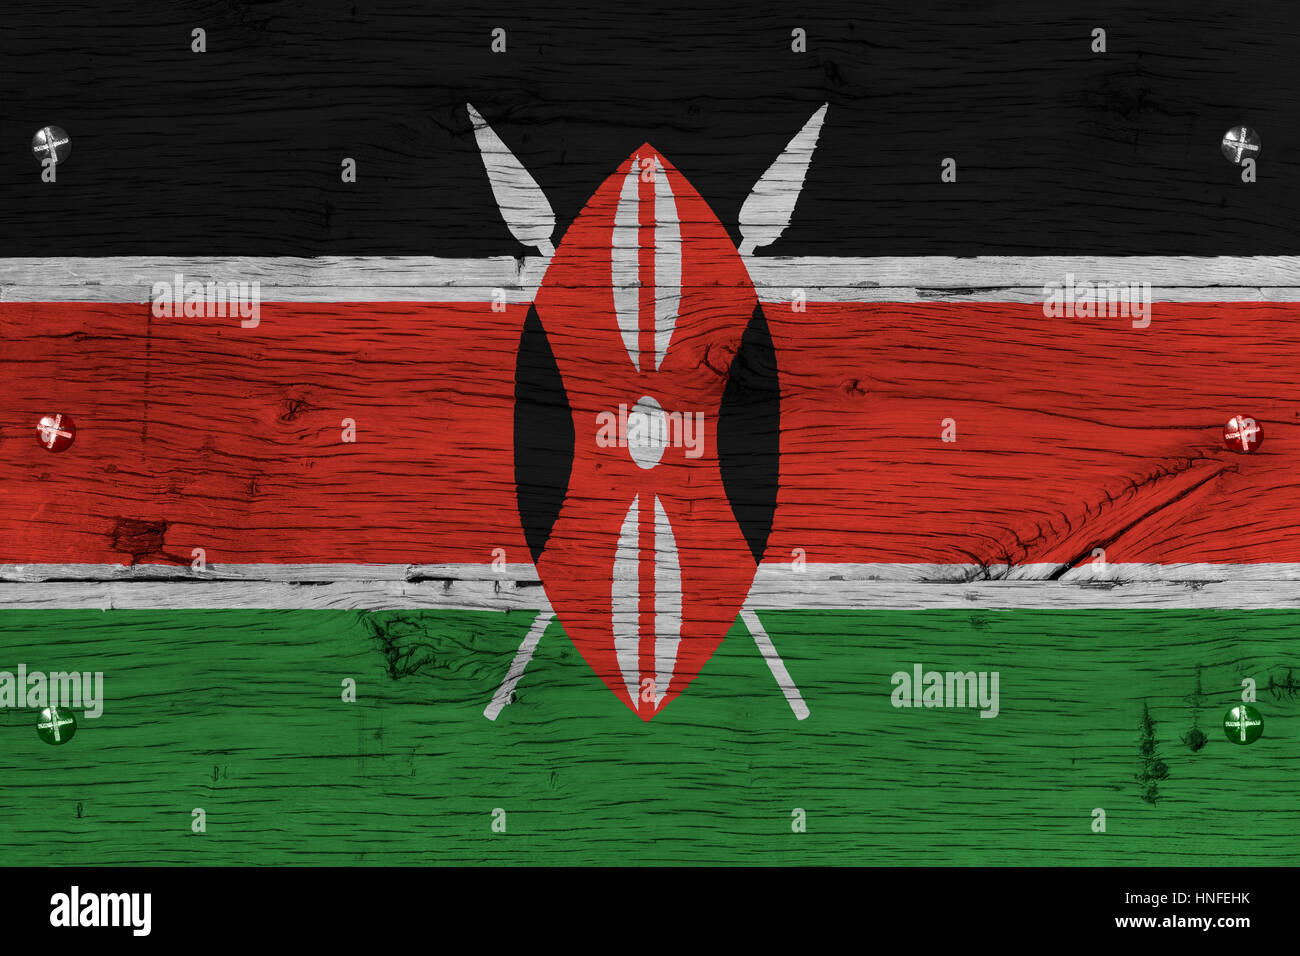 Kenya national flag painted on old oak wood. Painting is colorful on planks of train carriage. Fastened by screws or bolts. Stock Photo